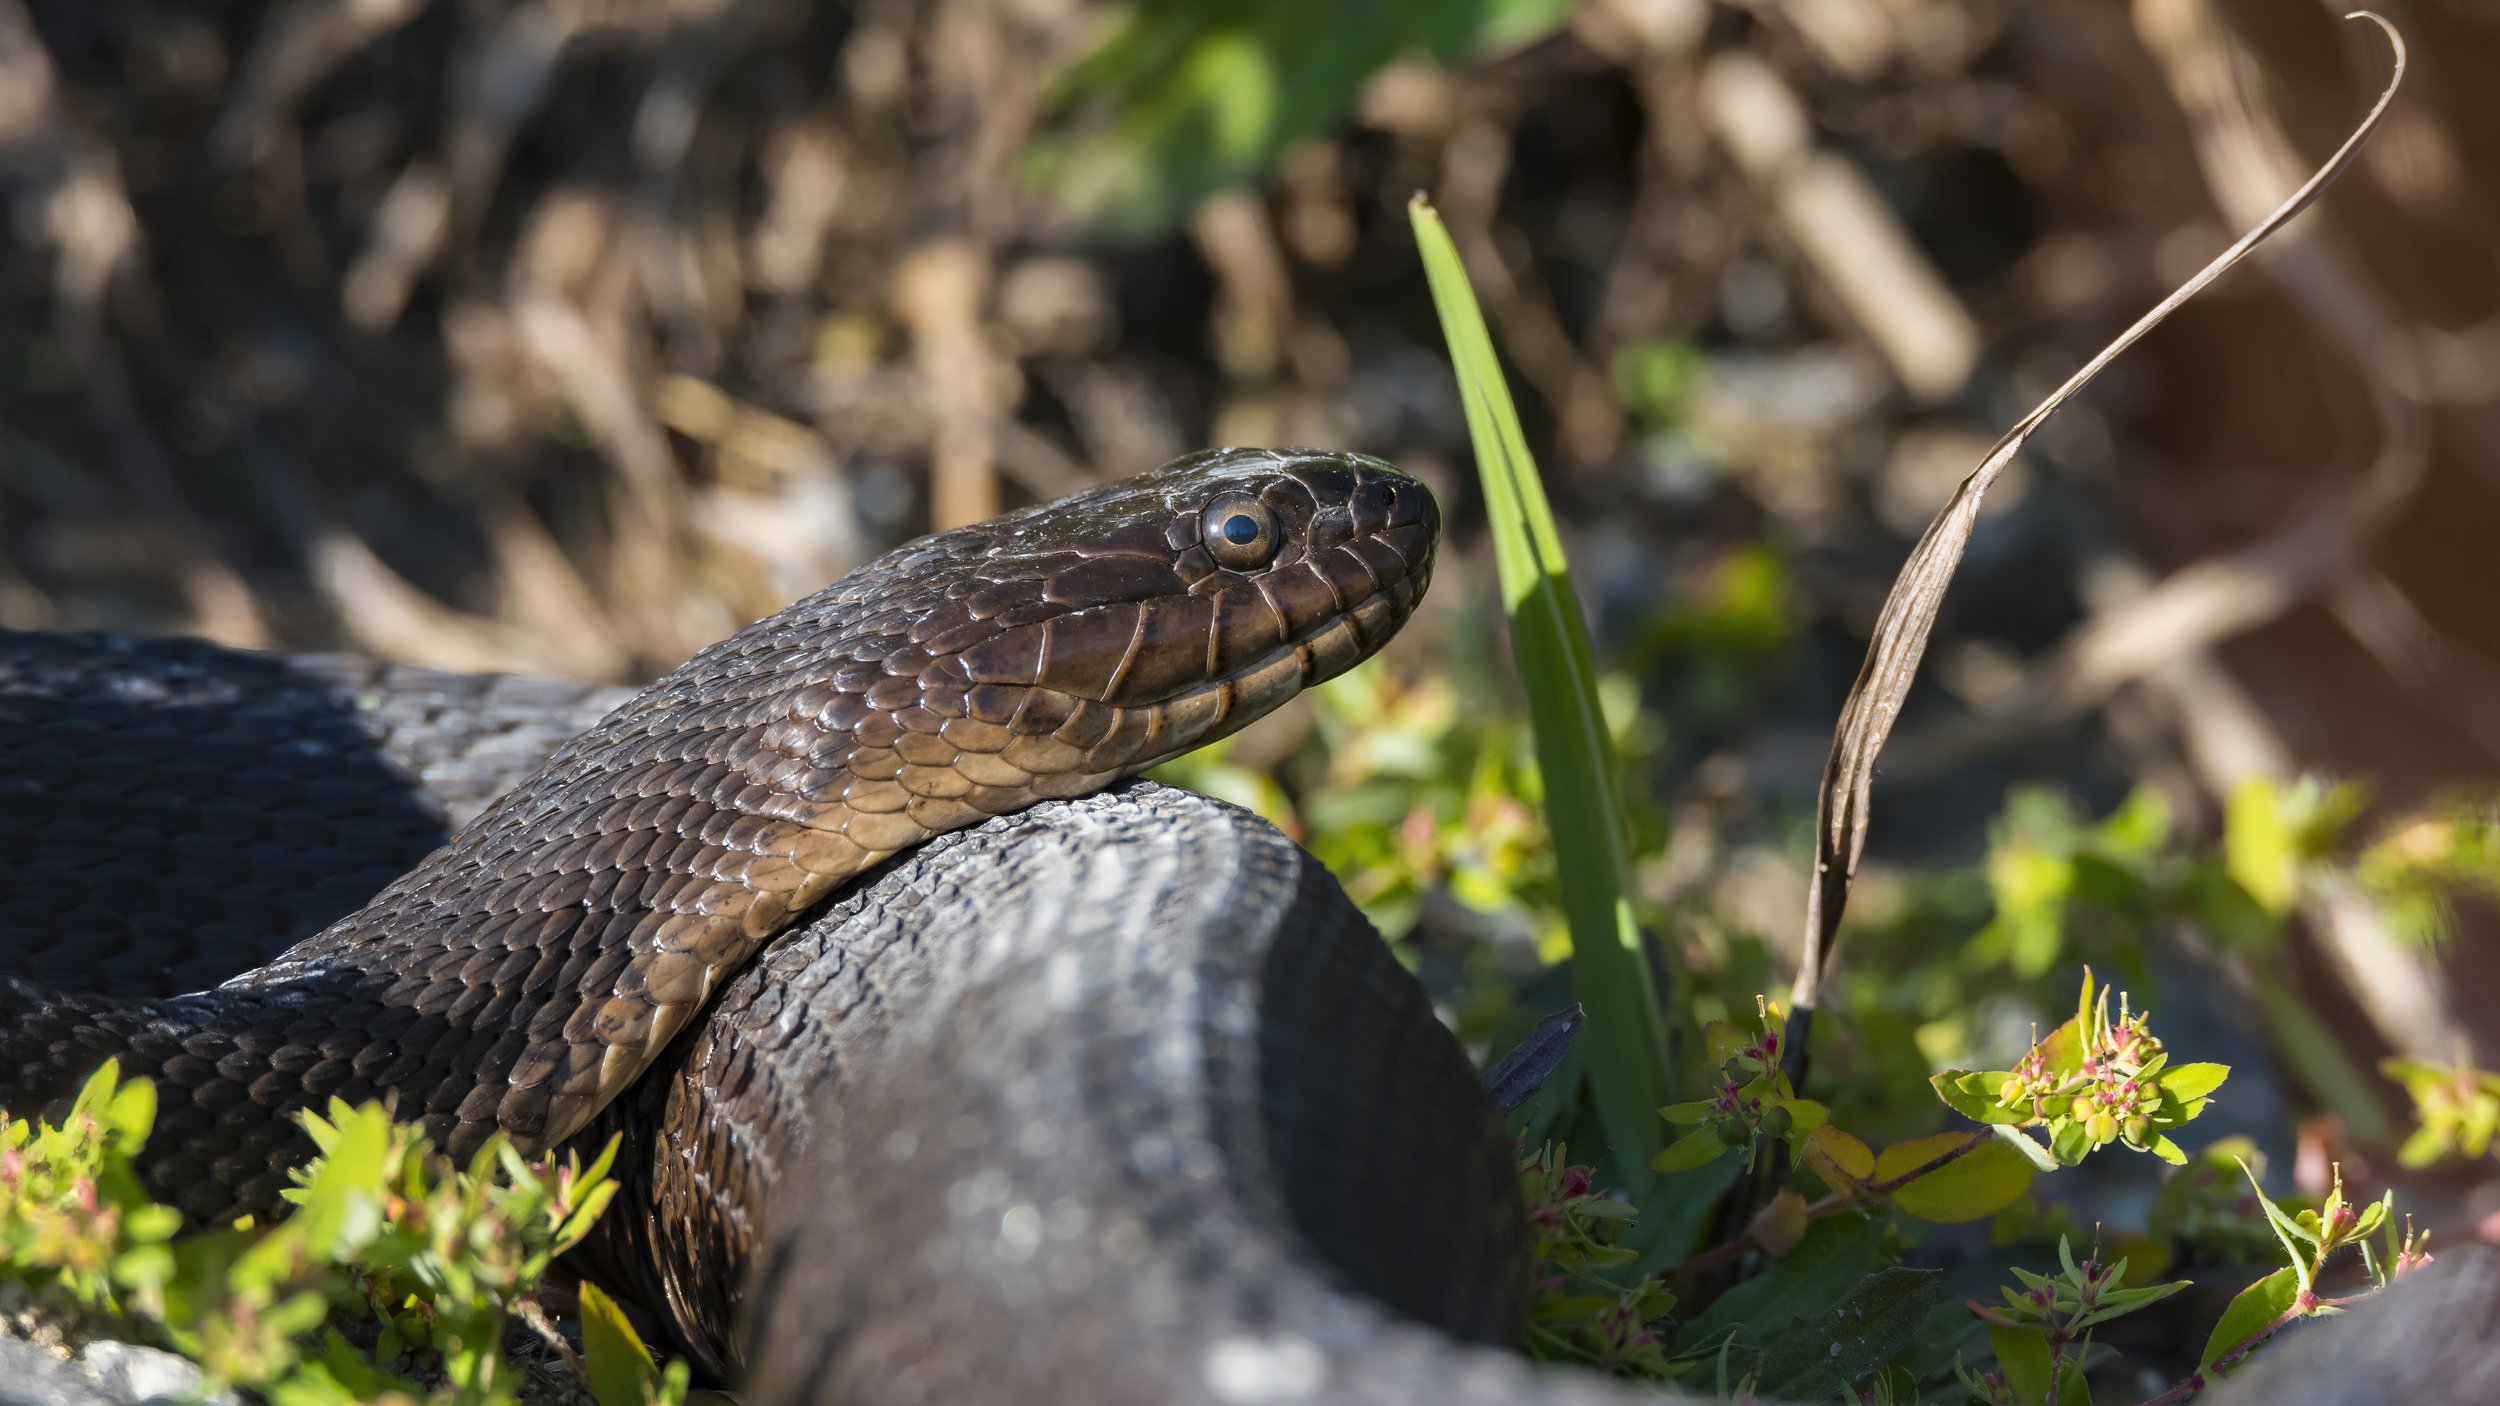 20 A northern water snake warms itself in the sunshine.jpg